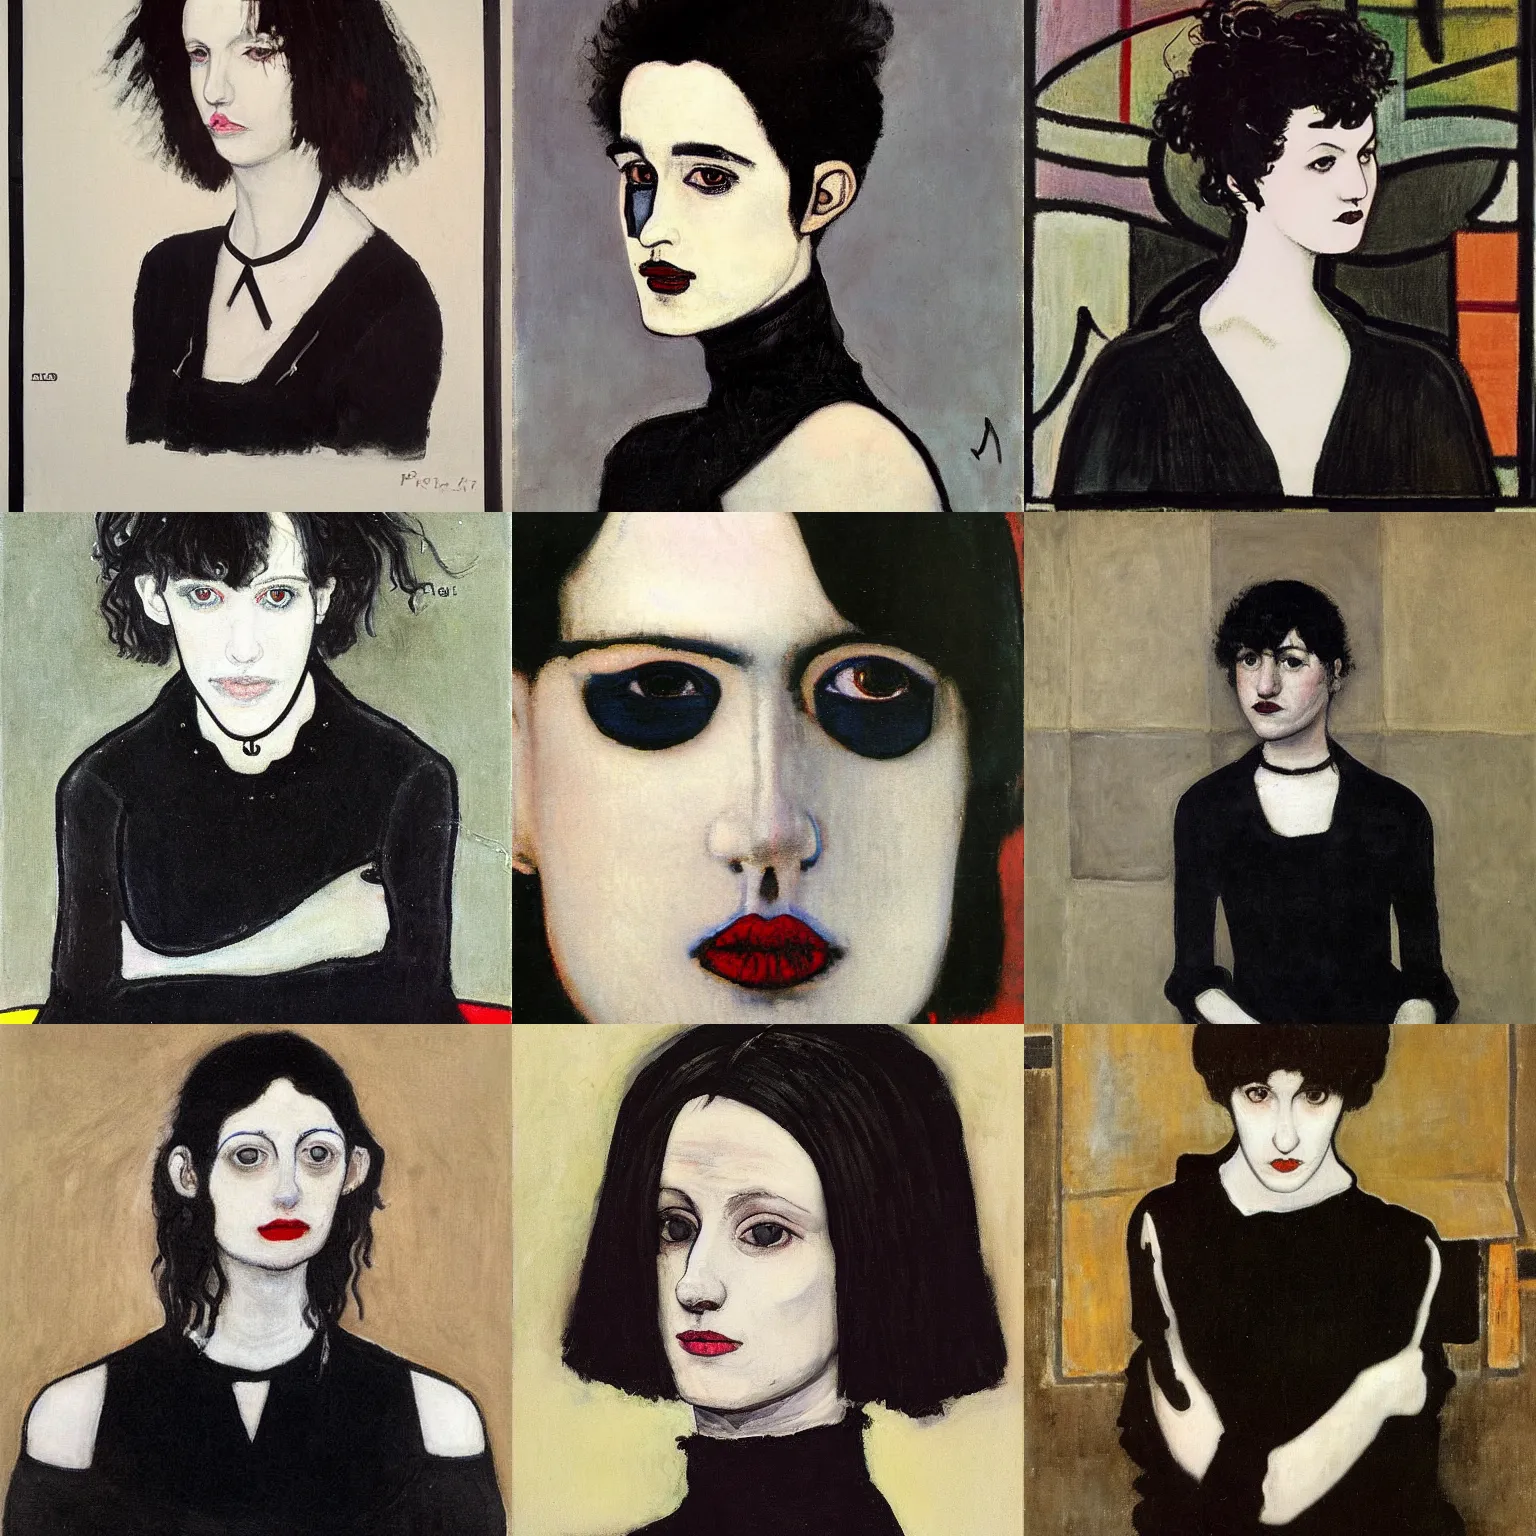 Prompt: A goth portrait painted by Piet Mondrian. Her hair is dark brown and cut into a short, messy pixie cut. She has a slightly rounded face, with a pointed chin, large entirely-black eyes, and a small nose. She is wearing a black tank top, a black leather jacket, a black knee-length skirt, a black choker, and black leather boots.